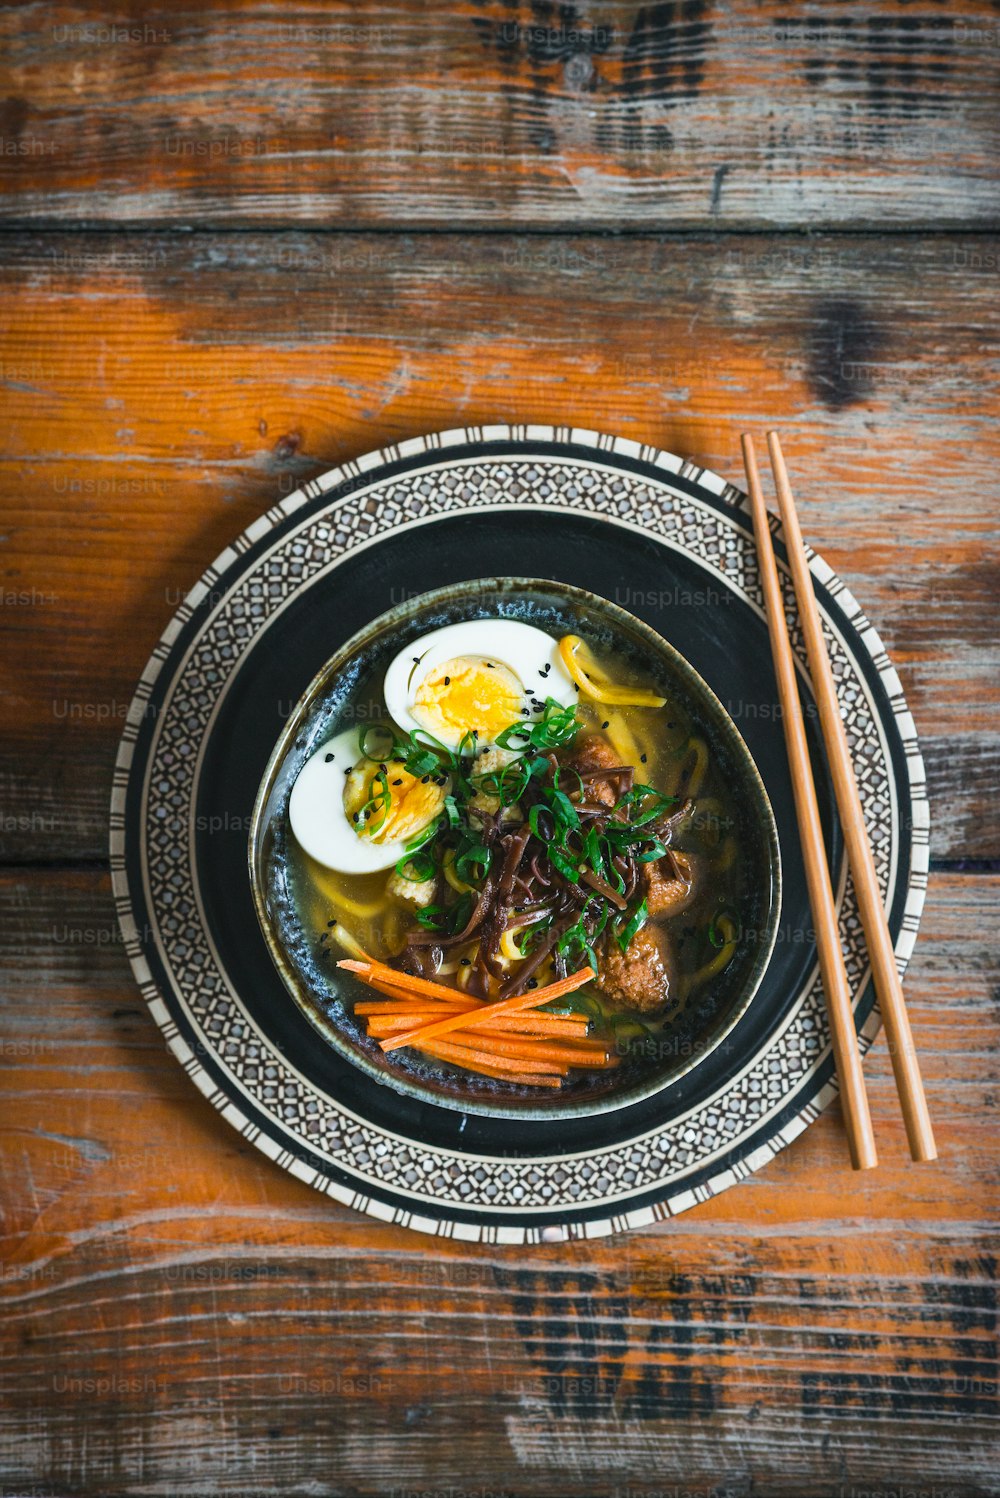 a bowl of soup with meat, carrots and an egg